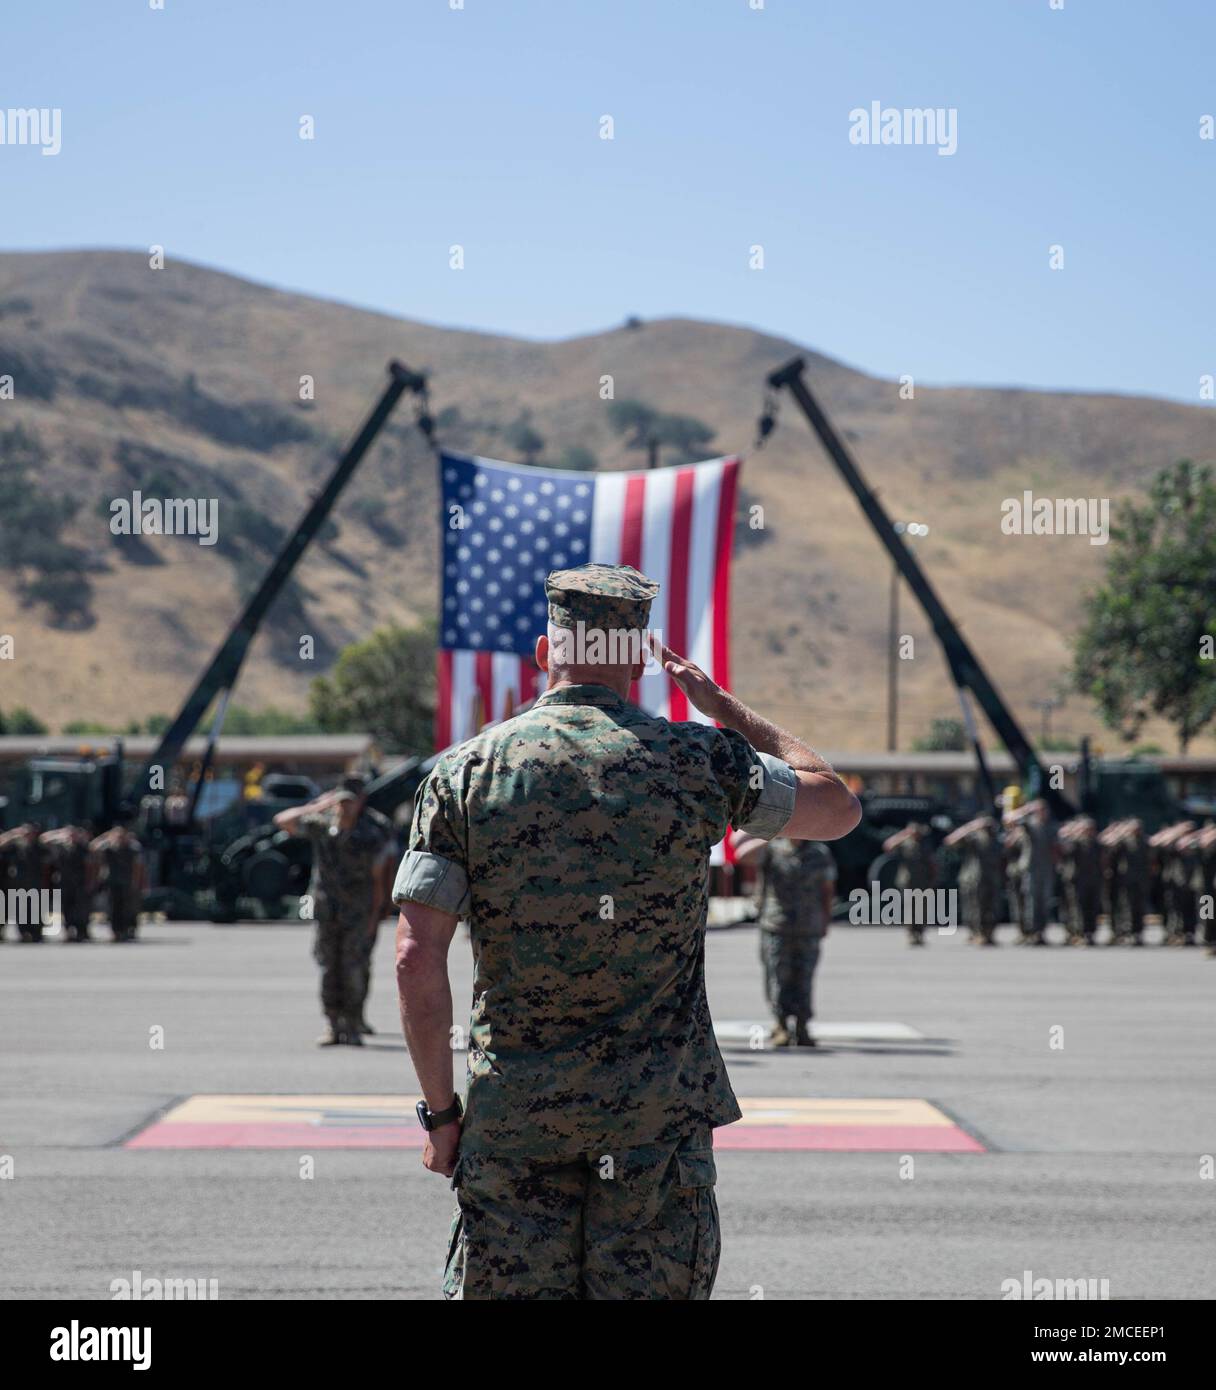 U.S. Marine Corps Maj. Gen. Roger B. Turner, the commanding general of 1st Marine Division, salutes during a change of command ceremony at Marine Corps Base Camp Pendleton, California, June 30, 2022. During the ceremony, Col. Daniel Skuce relinquished command of 11th Marine Regiment to Col. Patrick Eldridge. Stock Photo